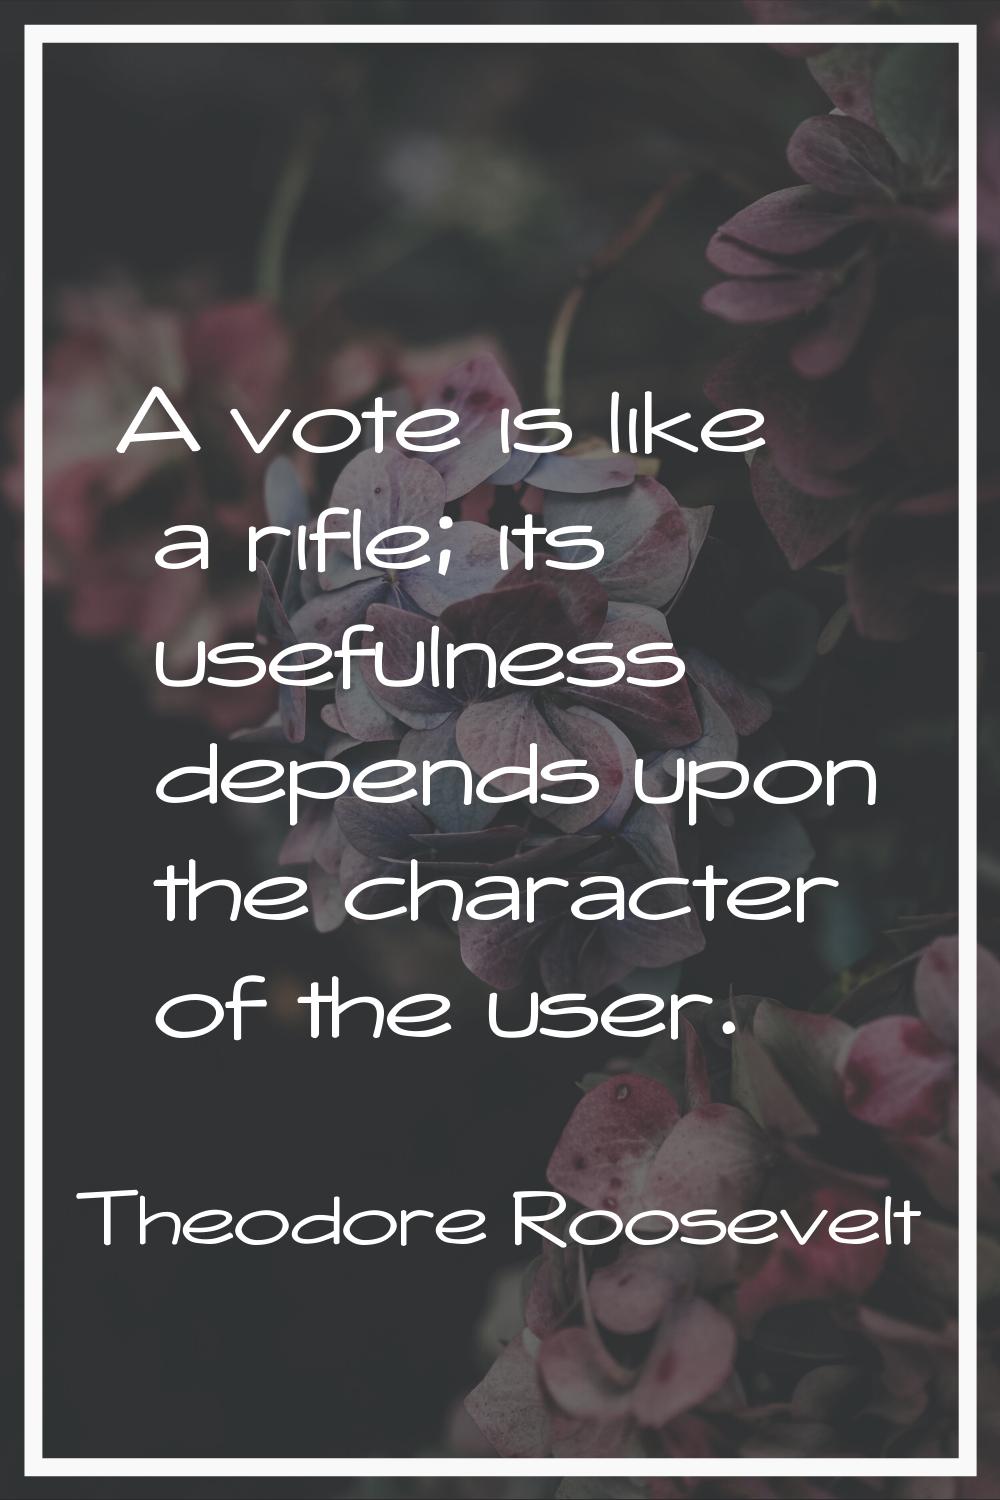 A vote is like a rifle; its usefulness depends upon the character of the user.